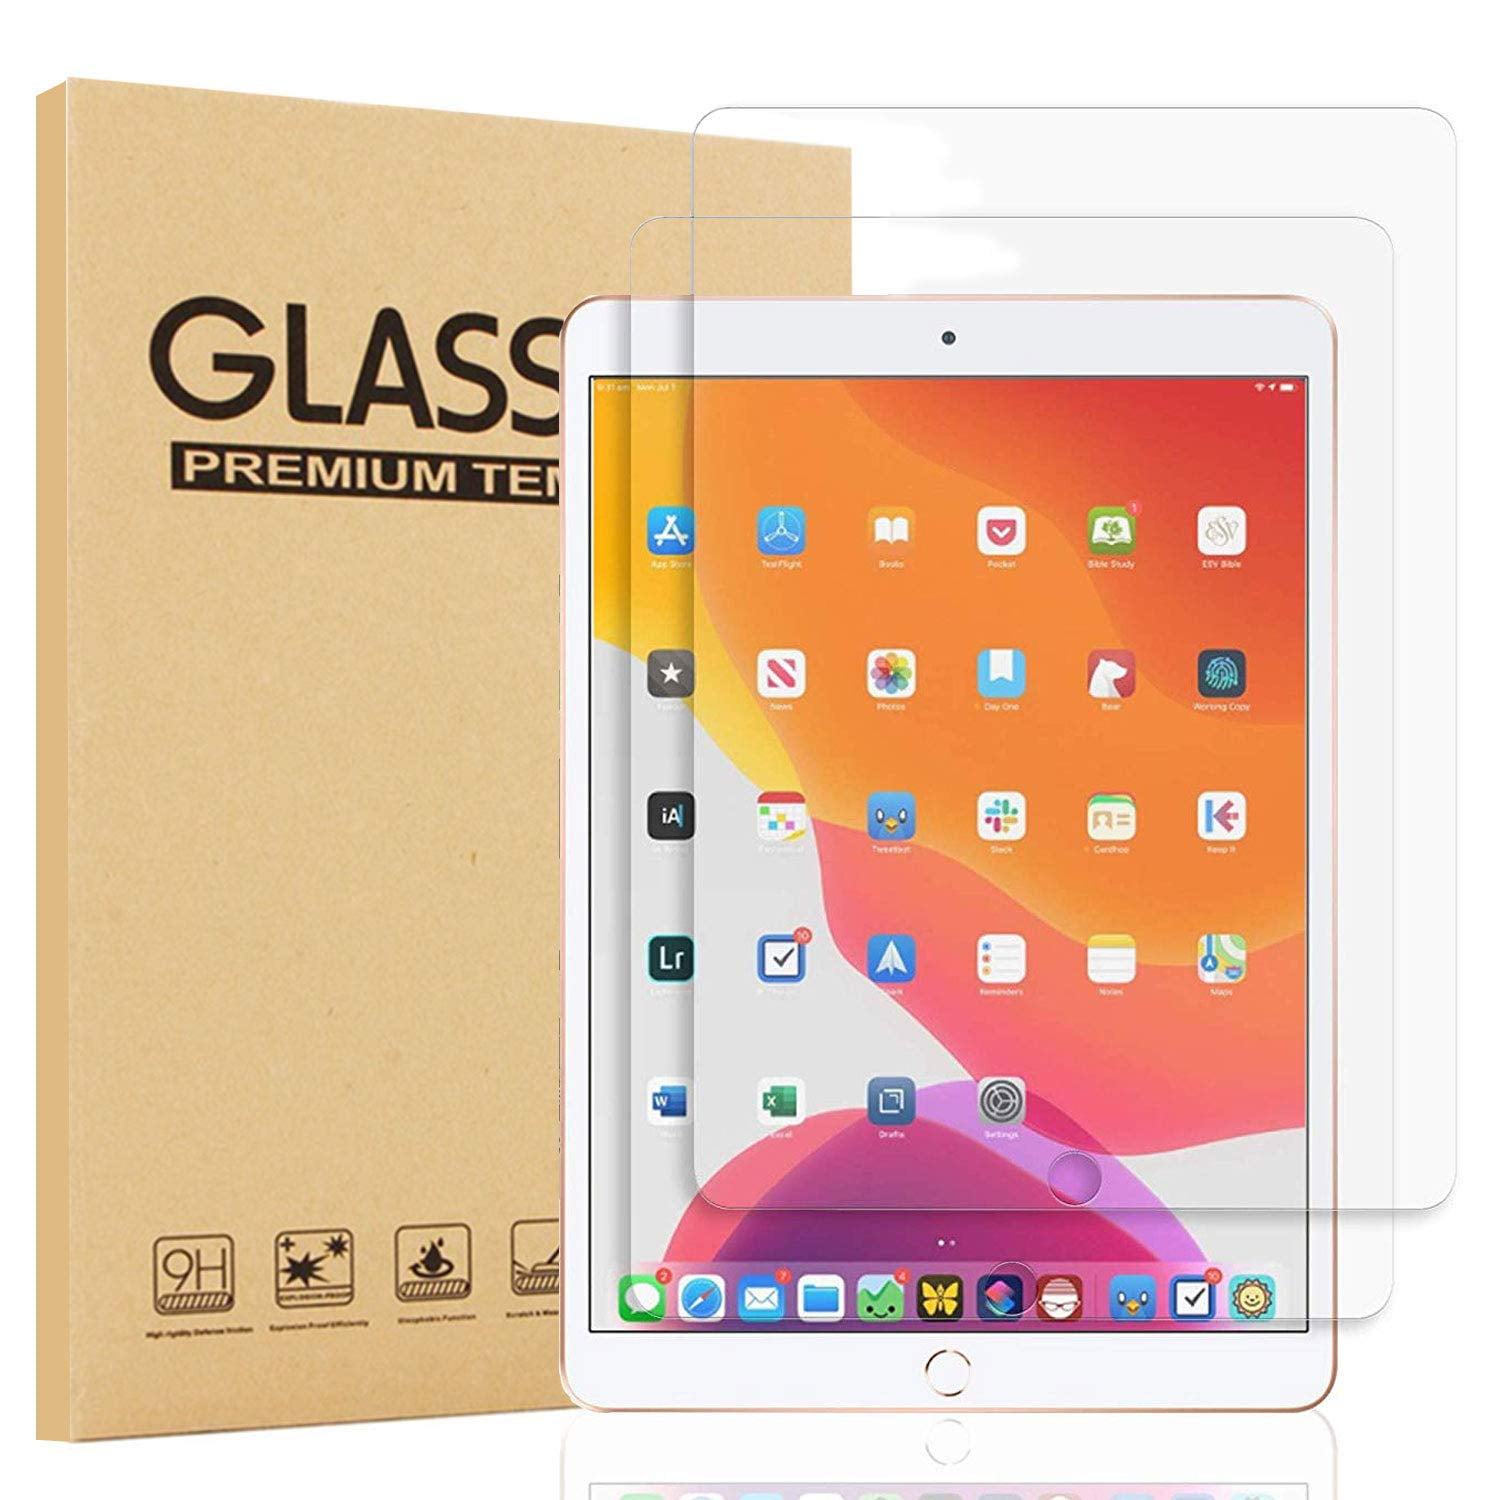 App Card Clear HD Screen Protector Guard Cover For Apple iPad 4 3 & 2 Gen Cloth 